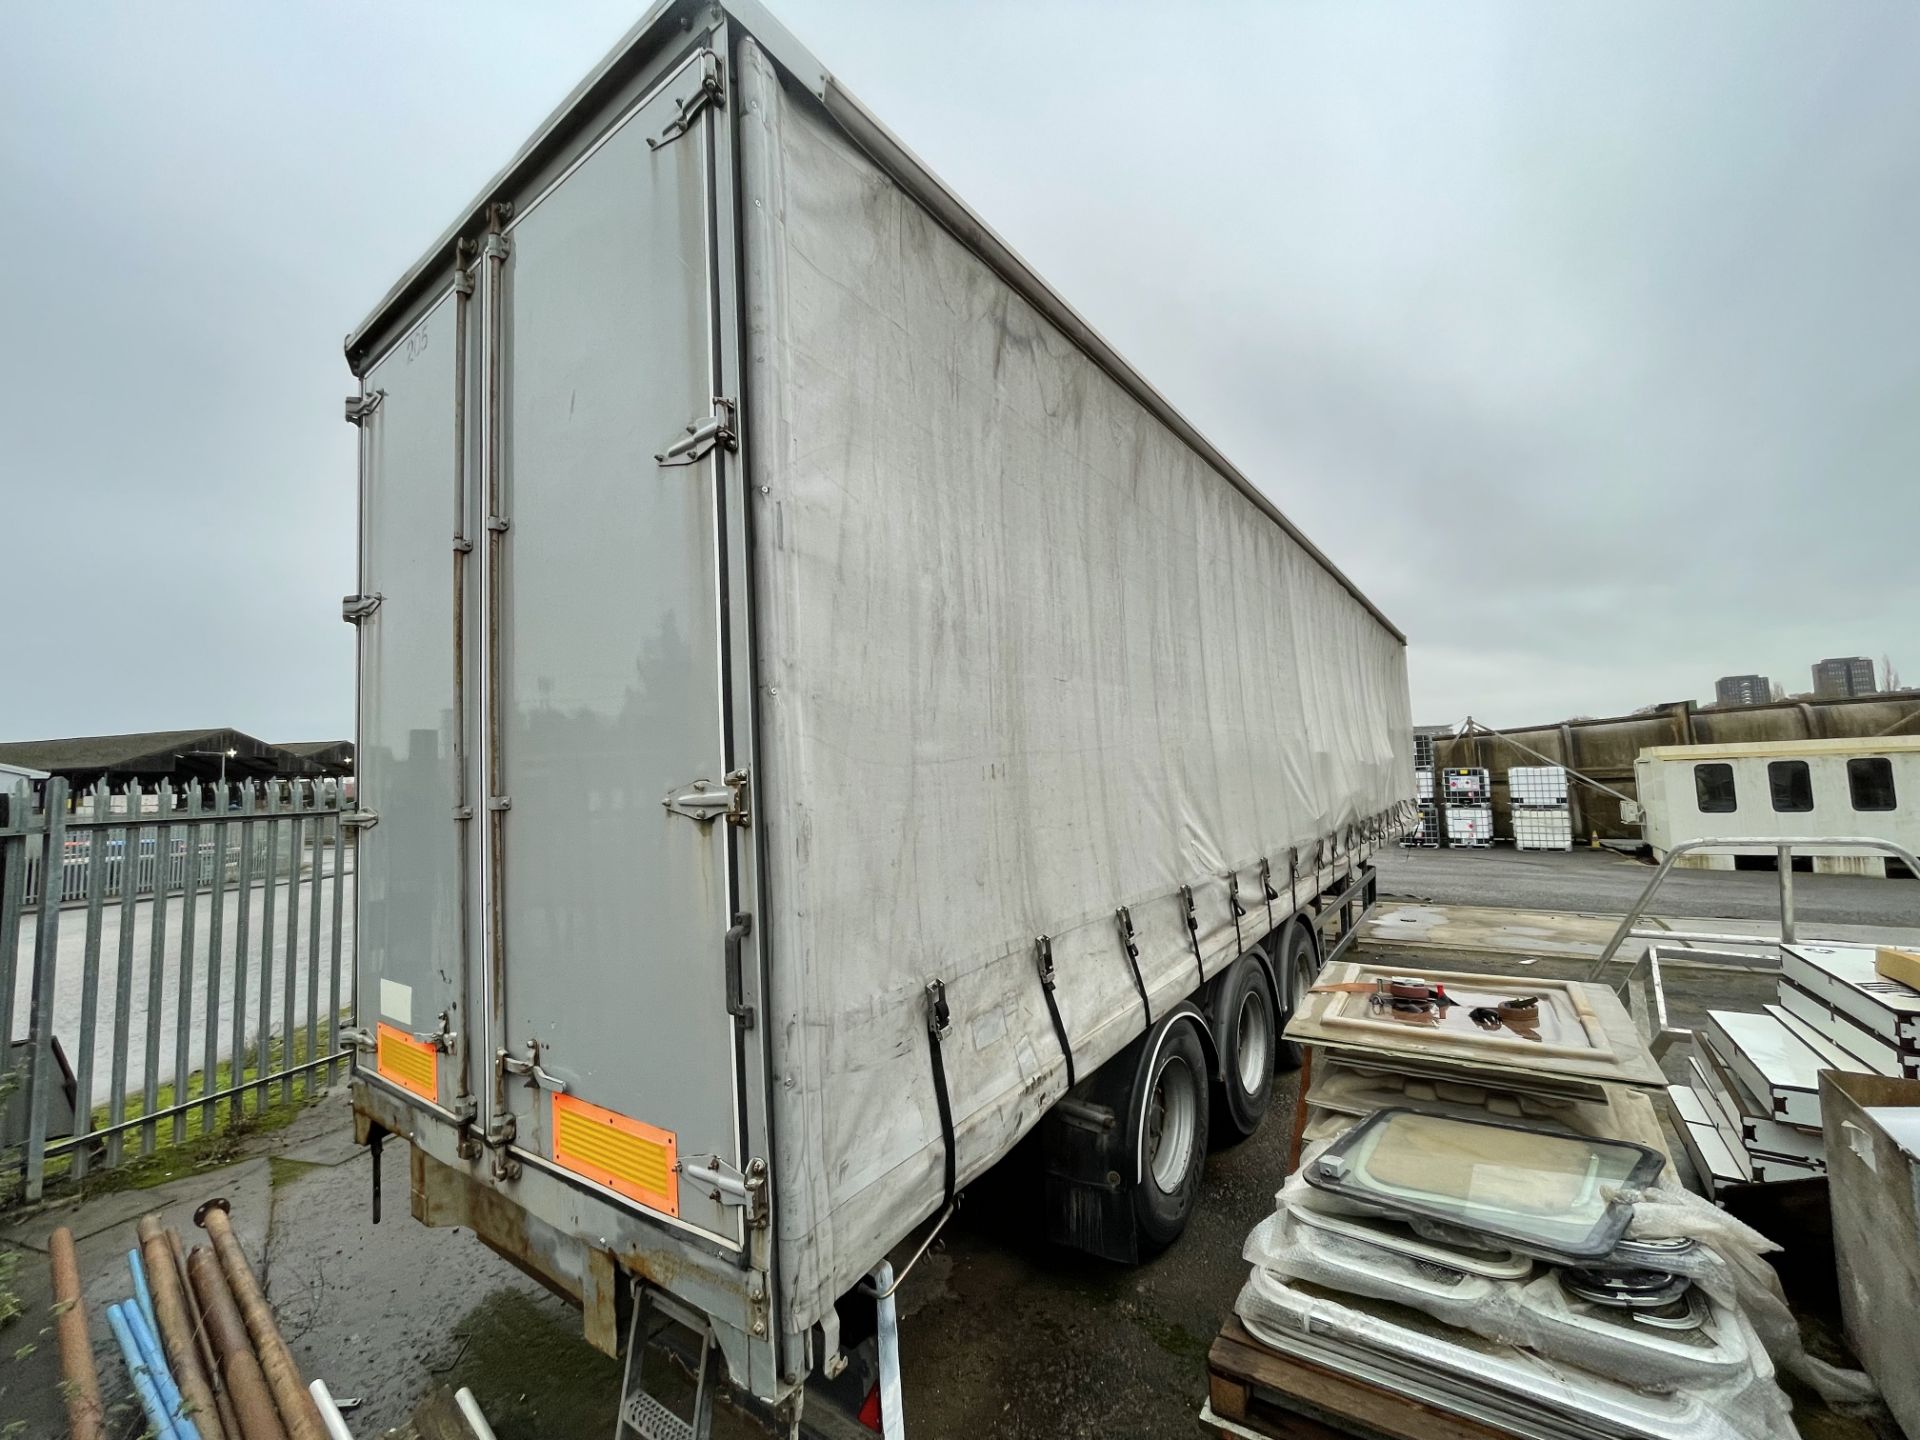 2005 SDC Trailers 45' Artic Curtainside Tri-Axle Trailer with Rear Barn Doors, Design Weight: 39, - Image 10 of 13